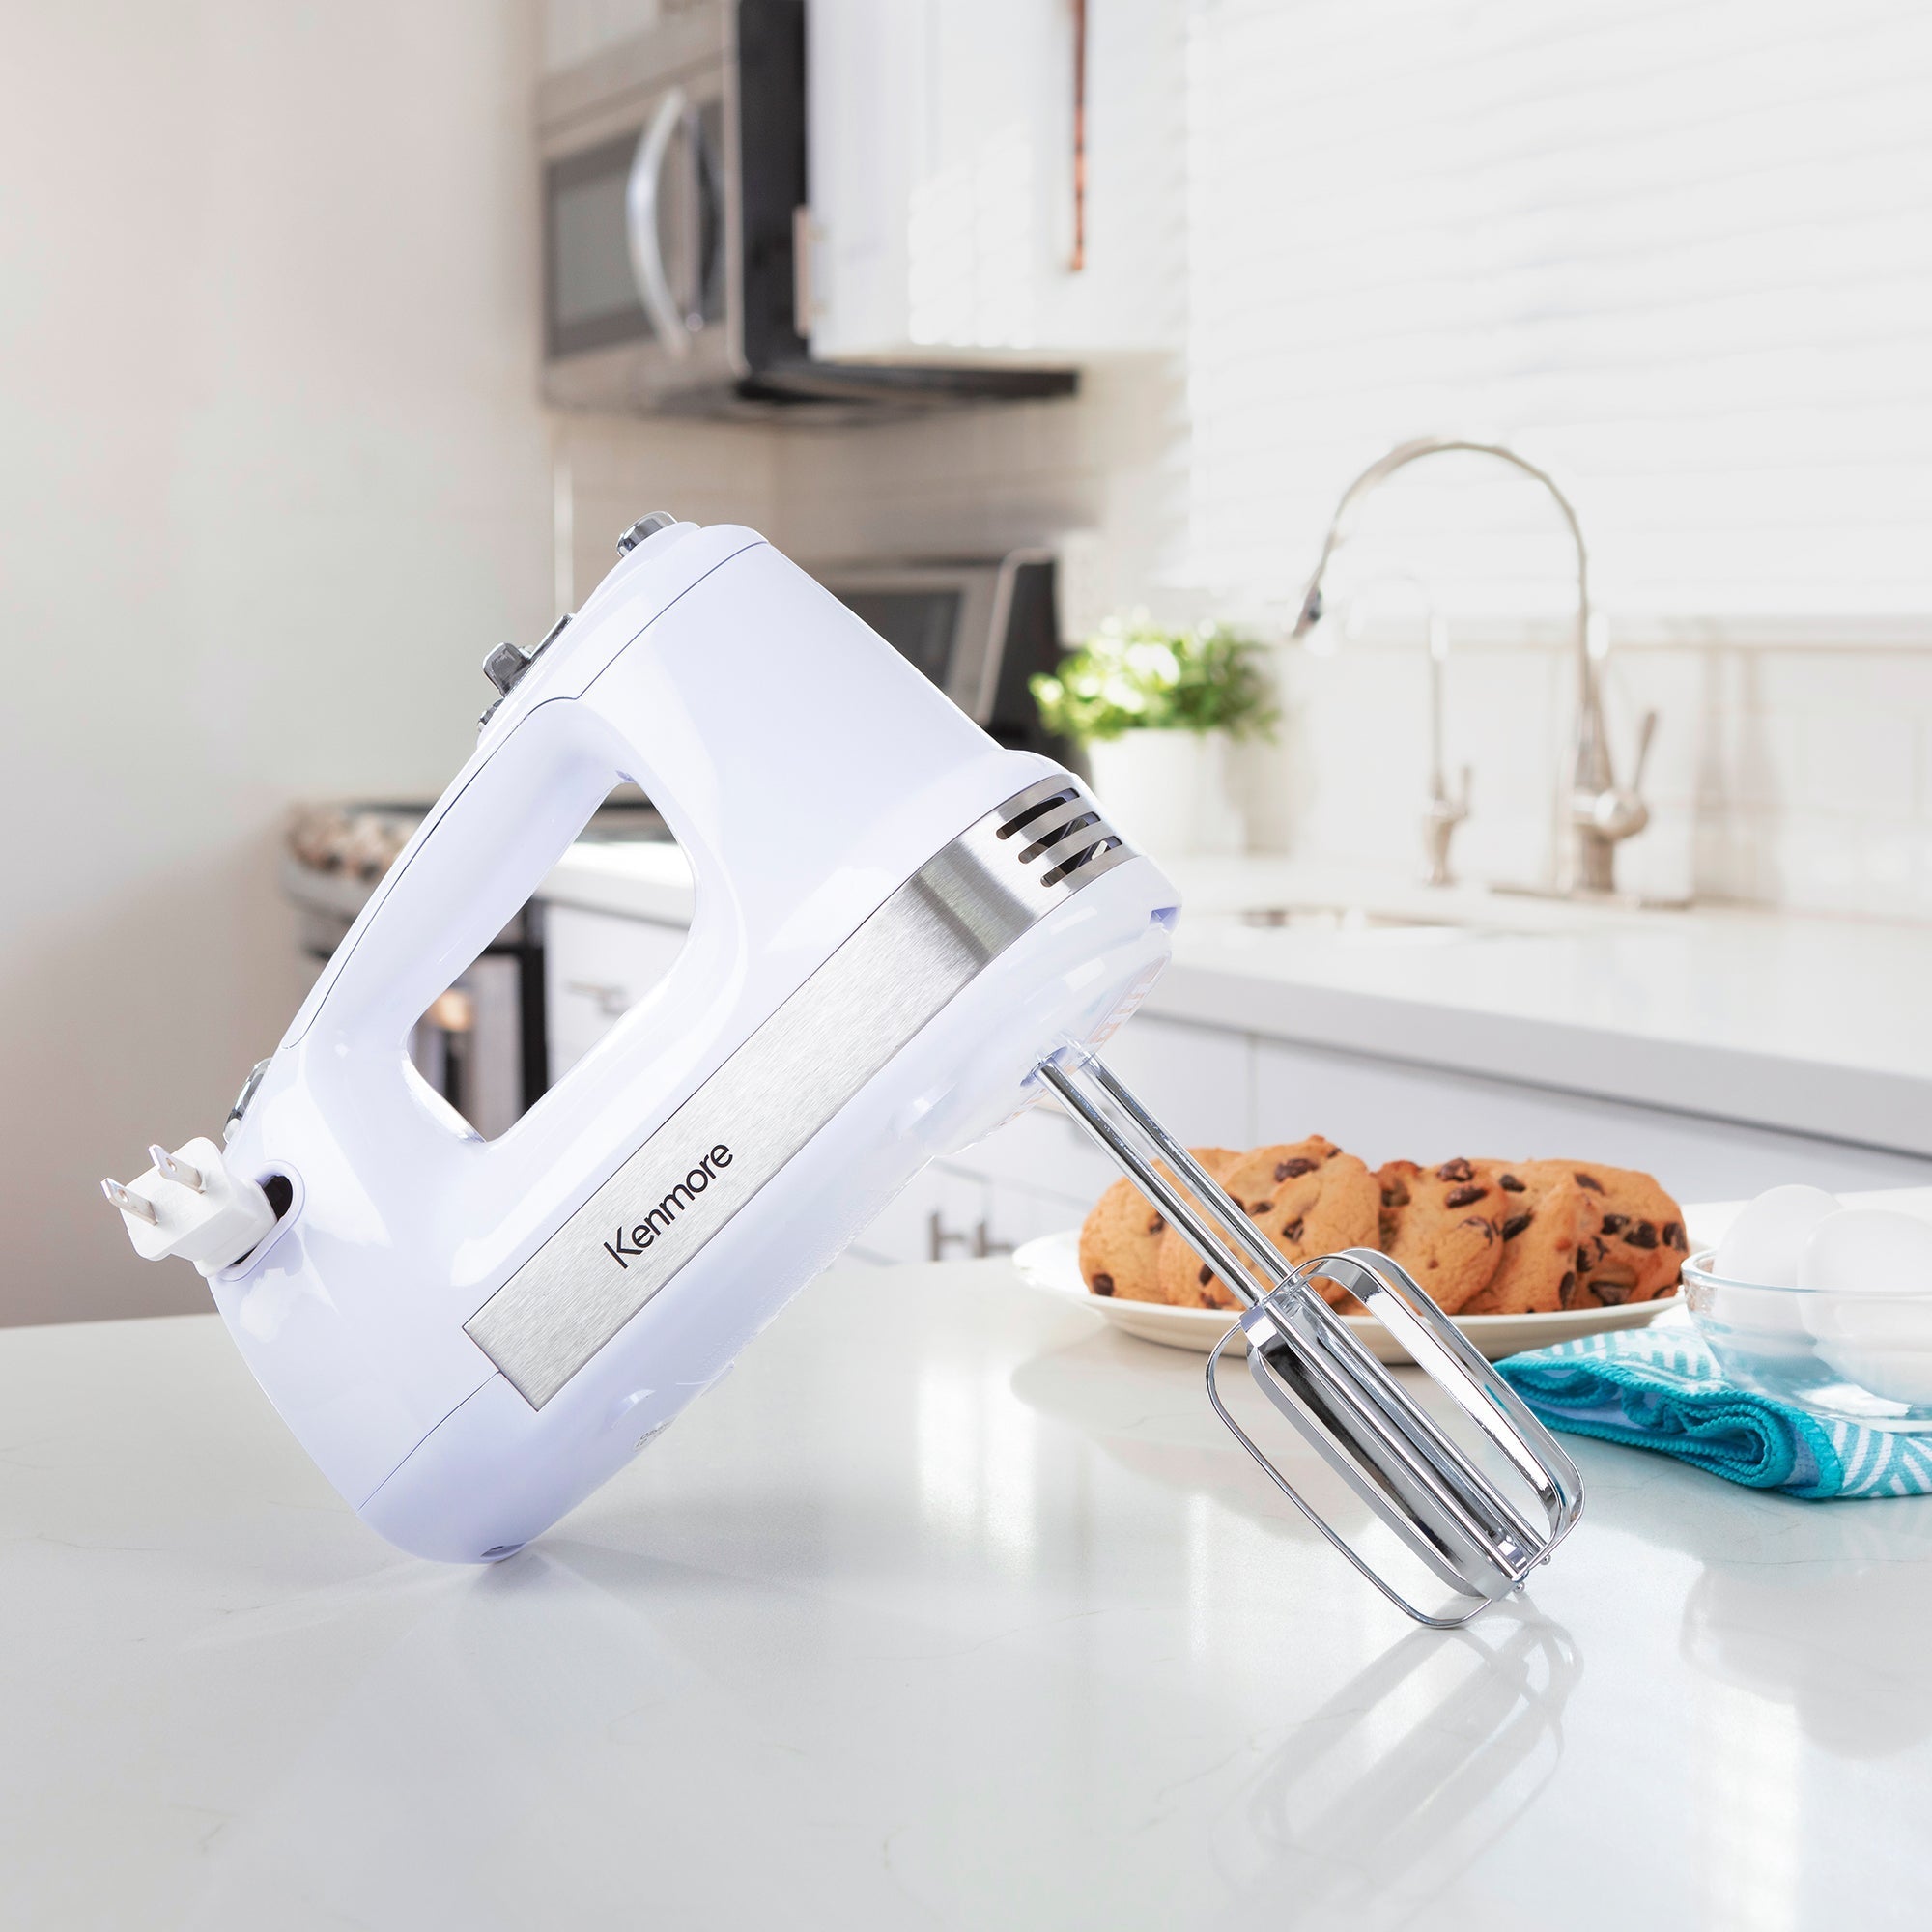 Kenmore hand mixer with beaters standing on a light gray countertop with a plate of chocolate chip cookies, a turquoise dish towel, and a glass bowl of eggs beside it and a sink, oven, and microwave in the background